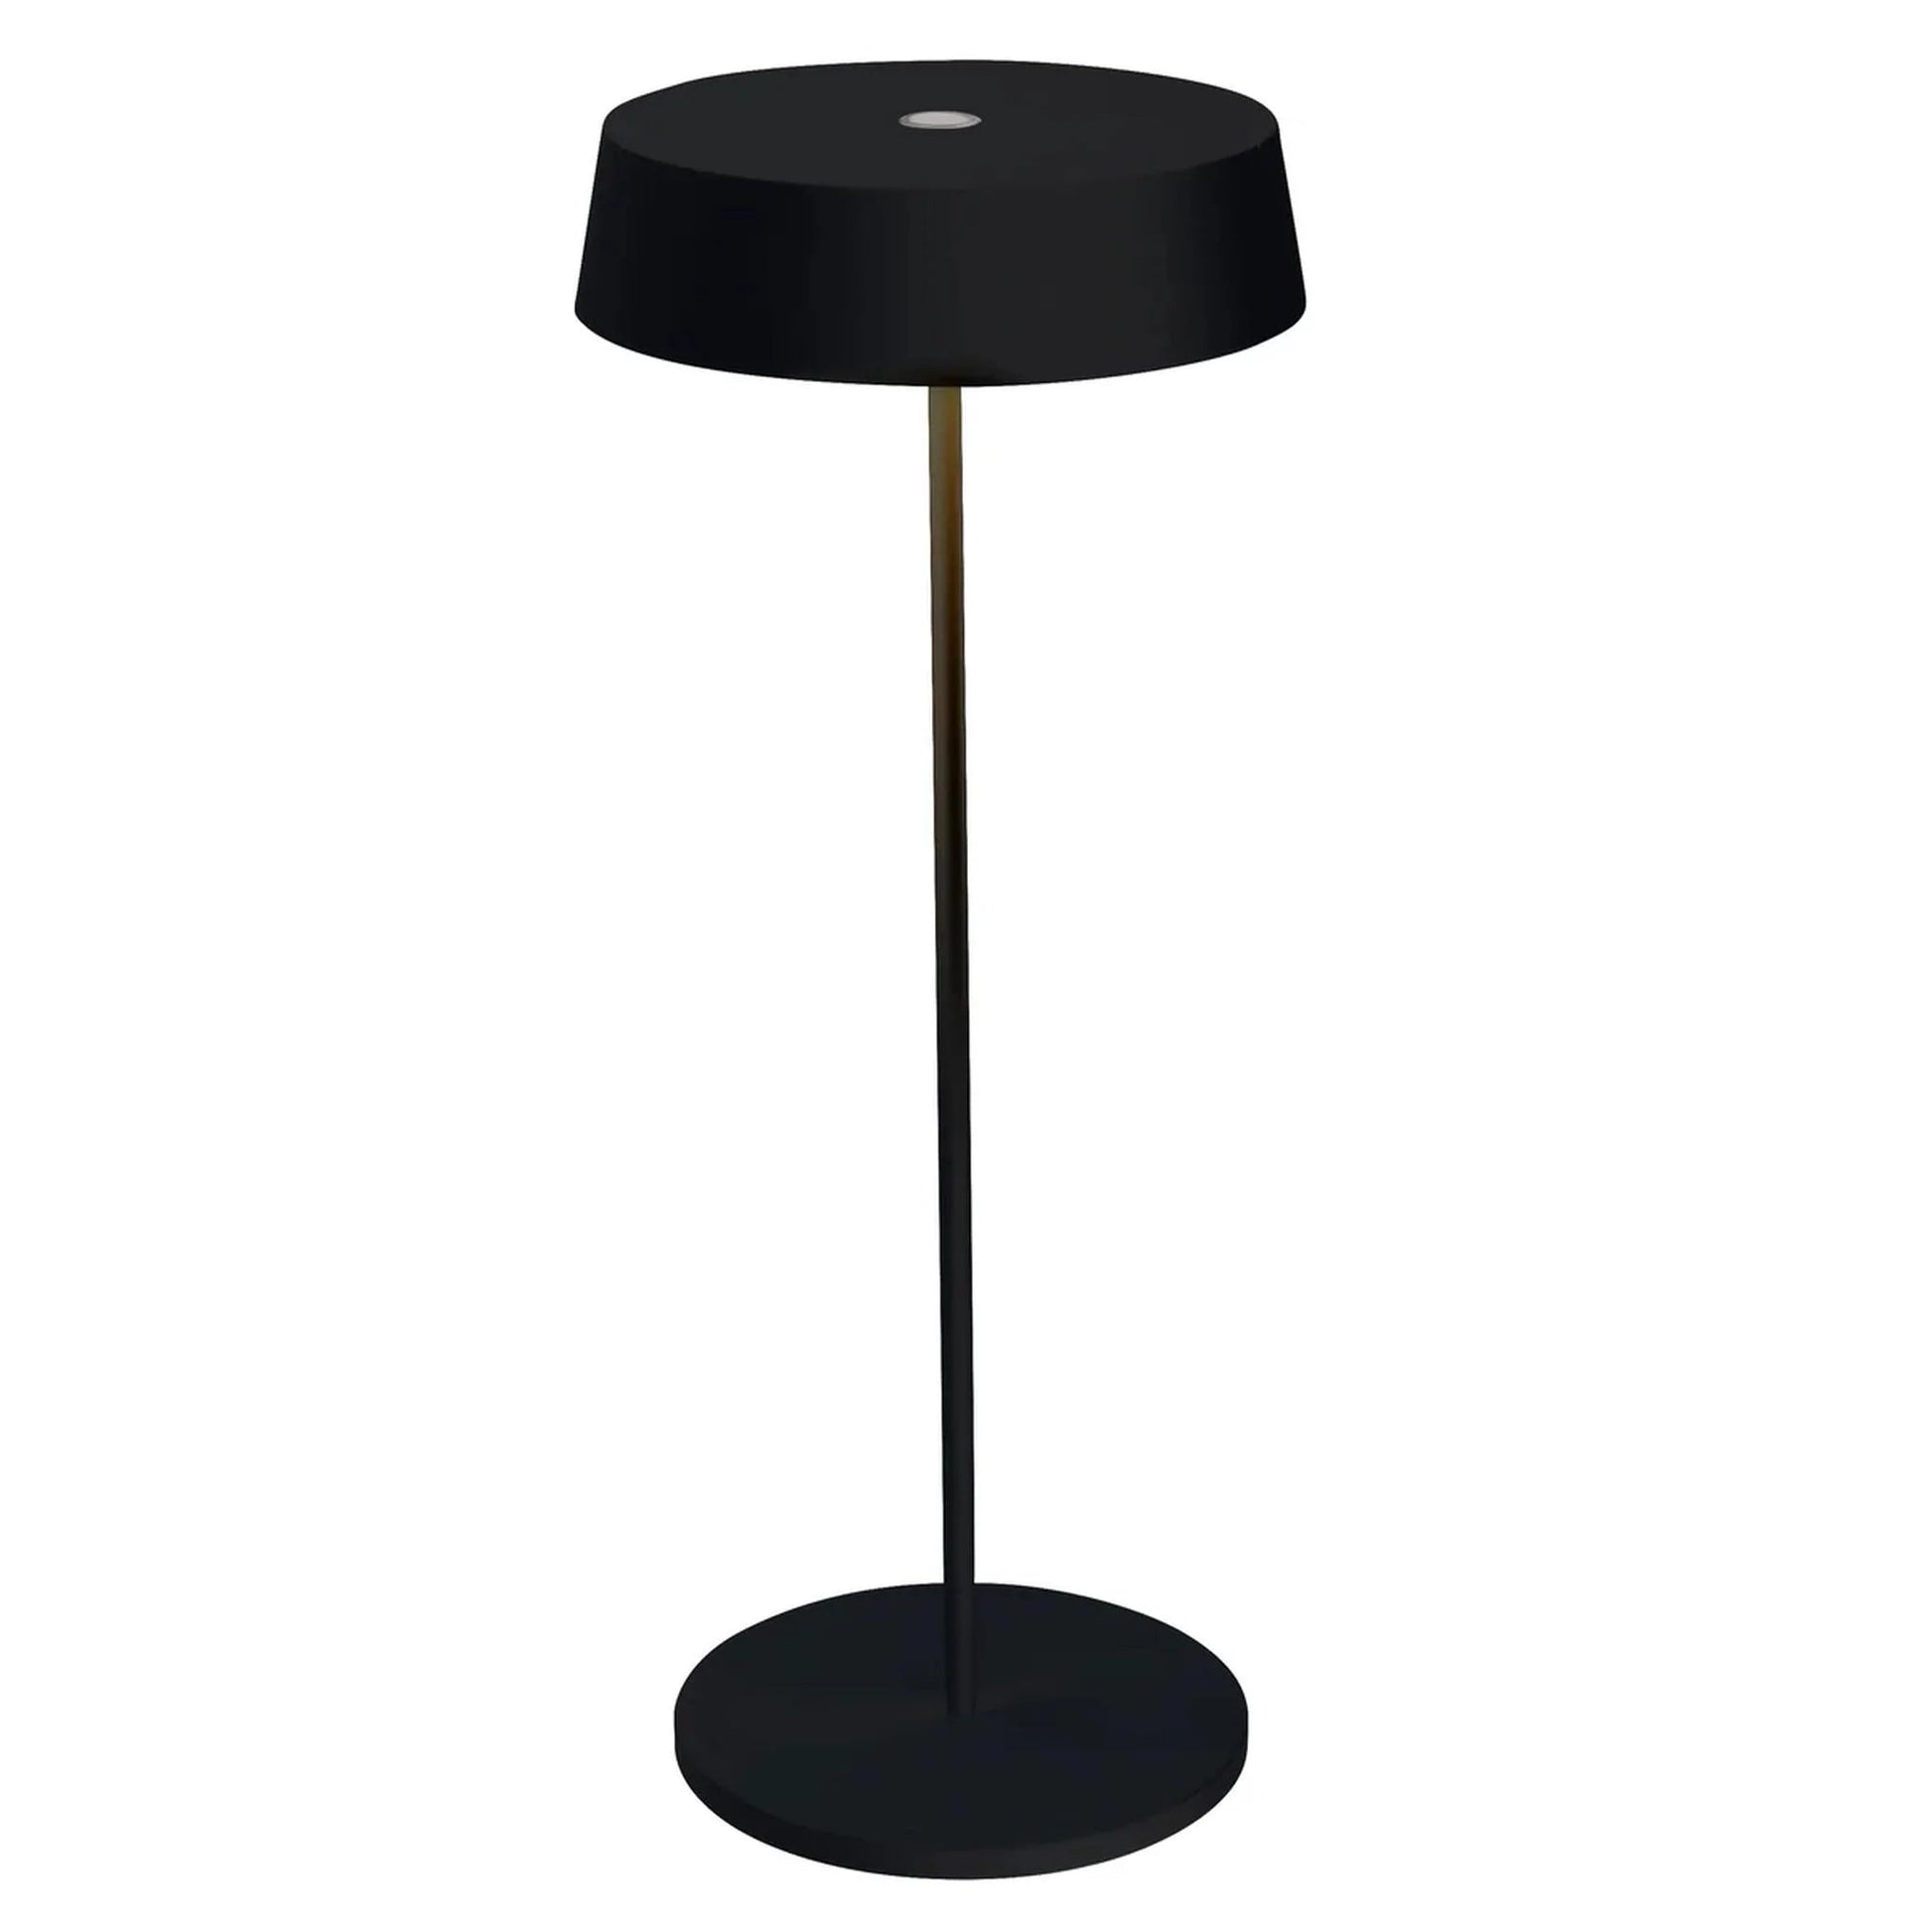 https://lampsdepot.com/cdn/shop/files/Arnsberg-Alessandro-Volta-12-Black-Portable-Battery-Powered-Dimmable-LED-Lamp-With-USB-Type-C-Charger.webp?v=1685872057&width=1946